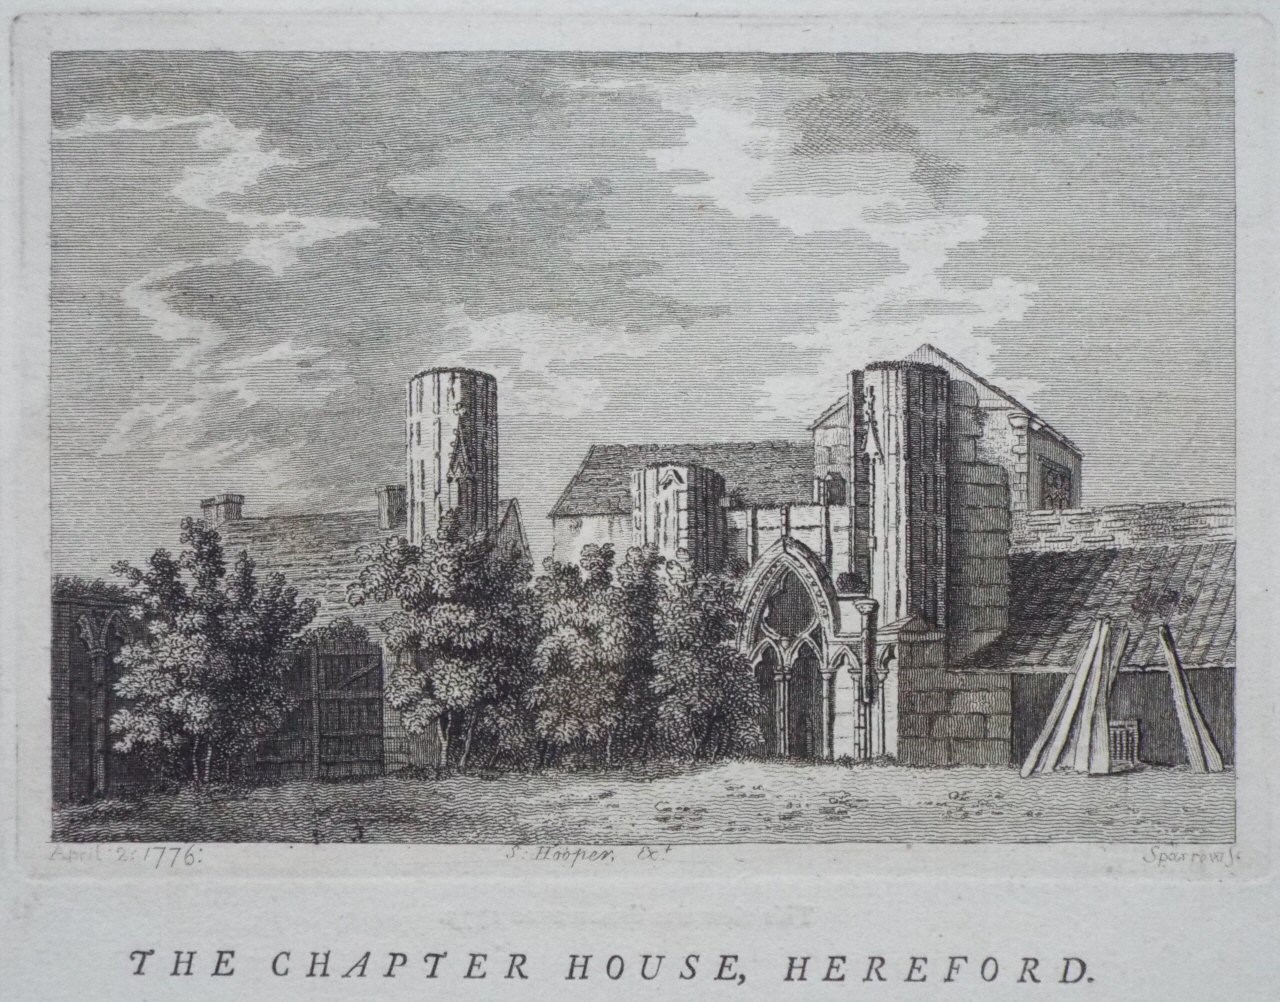 Print - The Chapter House, Hereford. - 